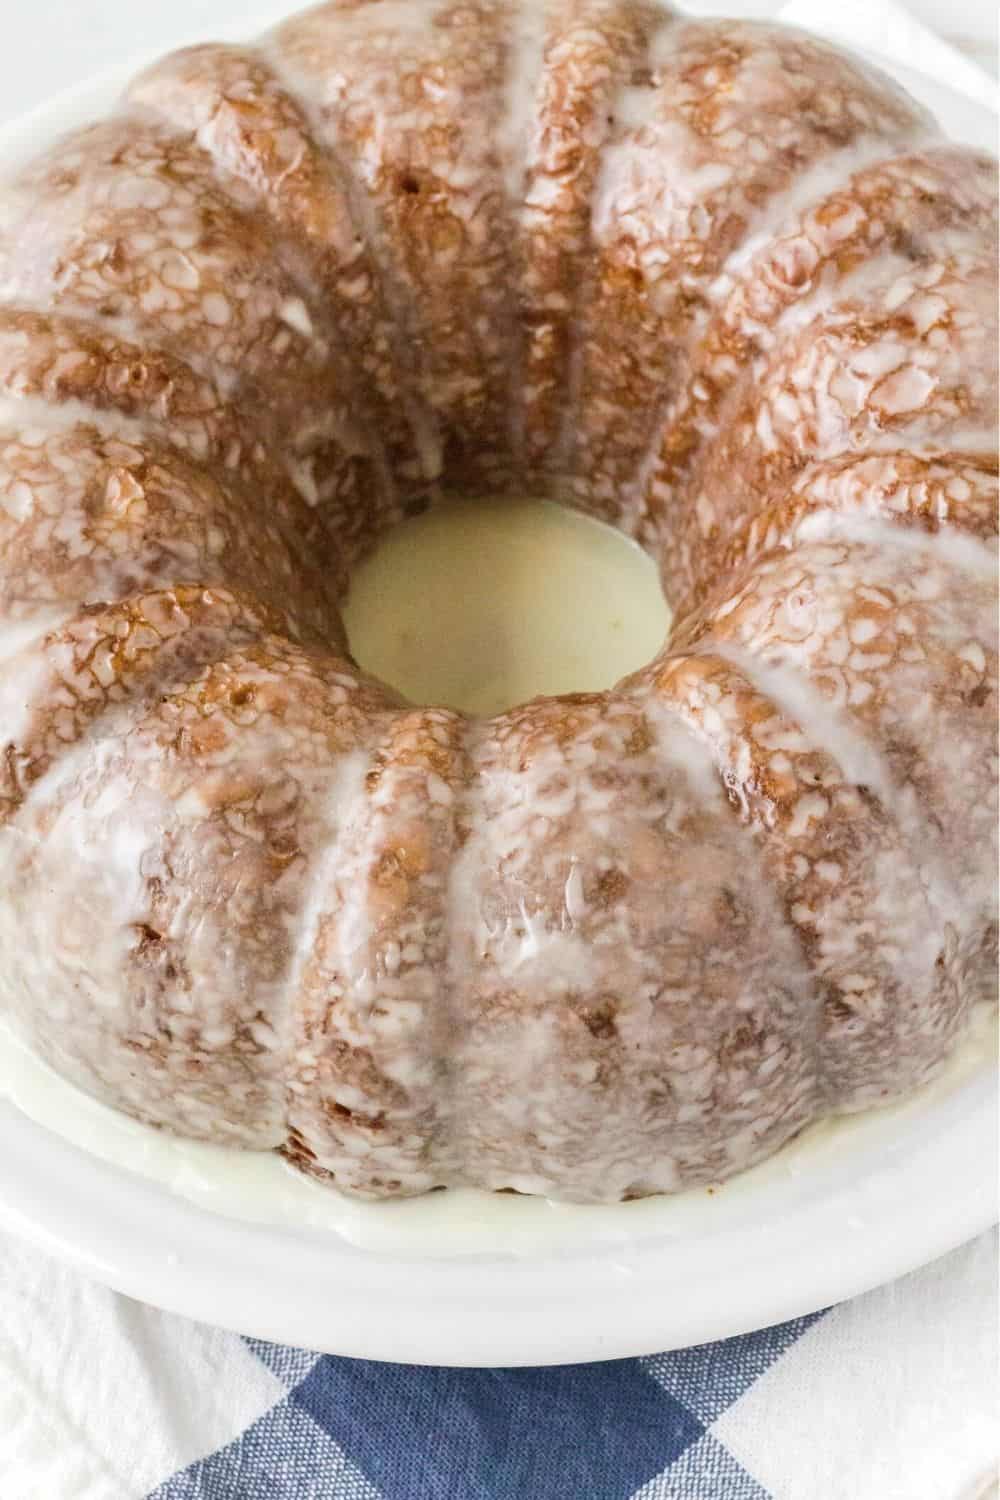 whole southern Sun Drop cake, made from a mix and topped with glaze